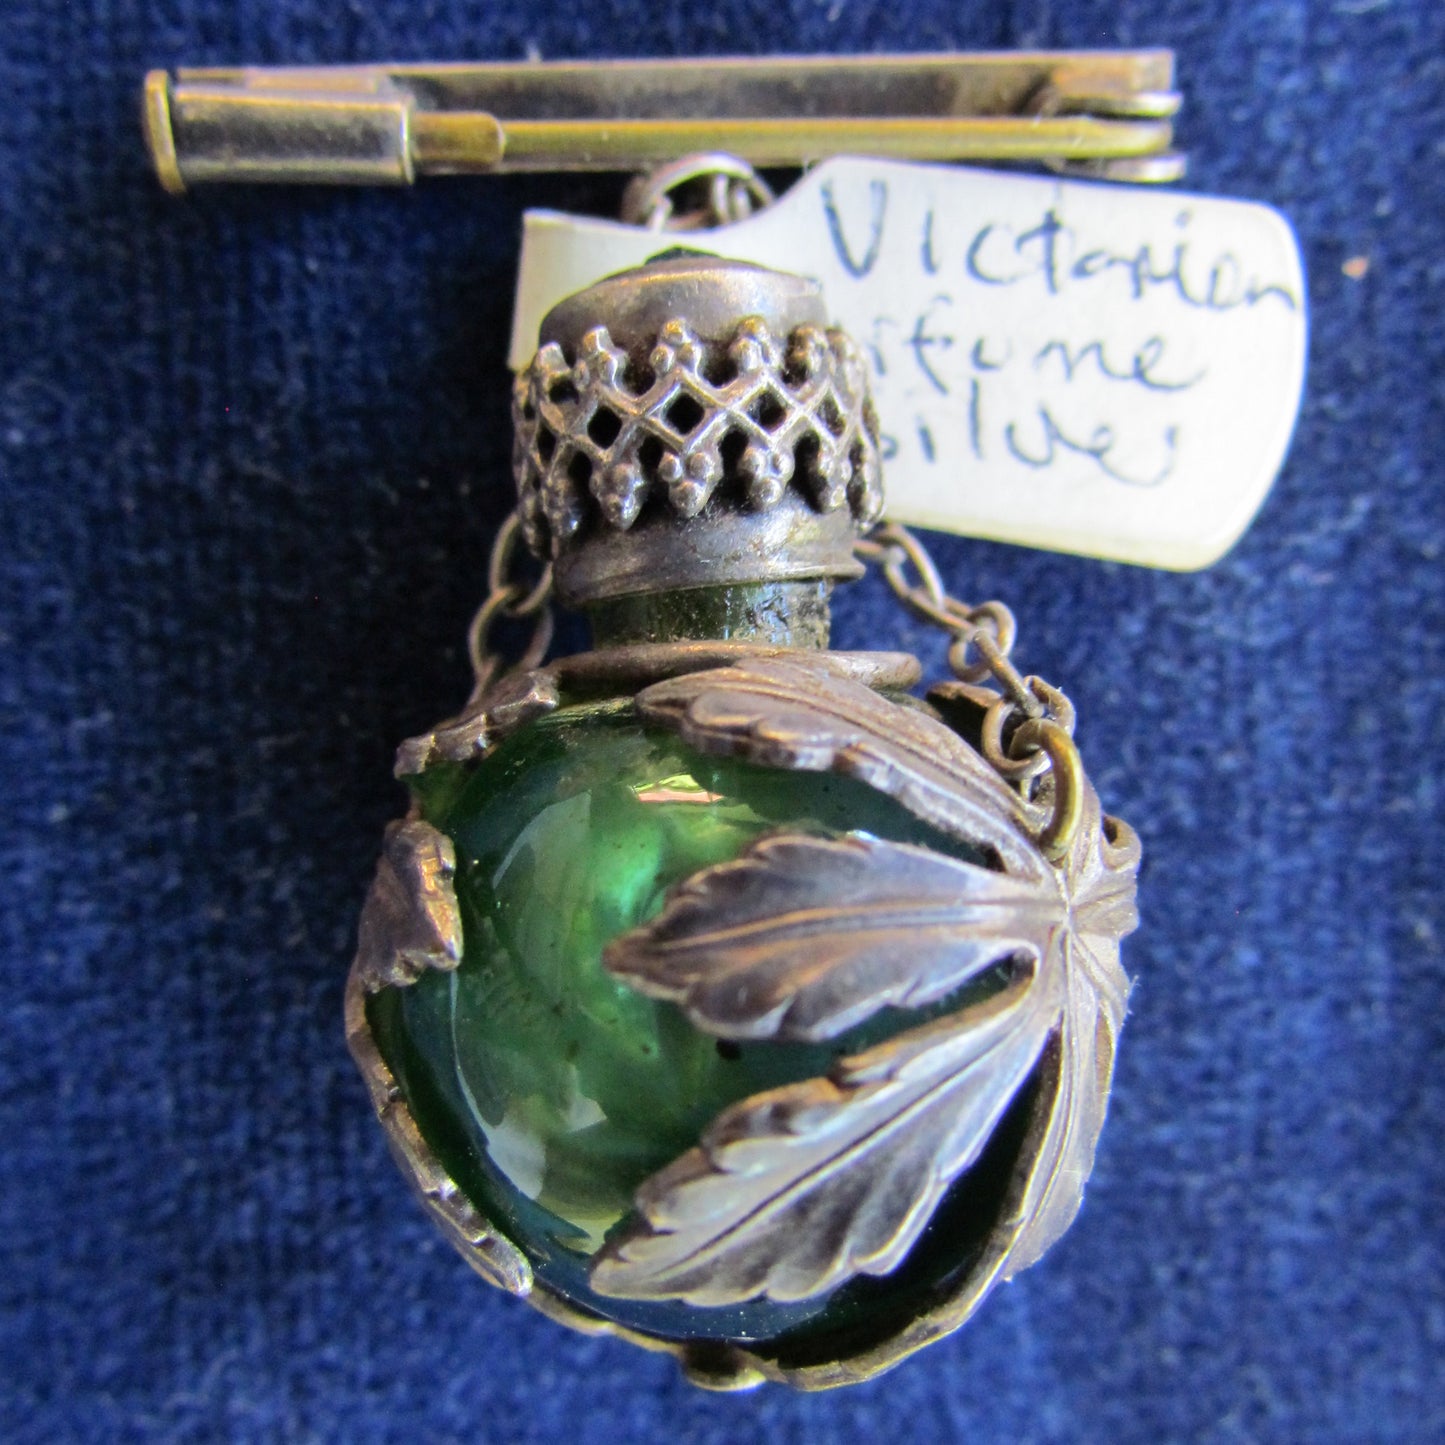 Unmarked Silver Green Cased Perfume Scented Oil Bottle Suspended From A Bar Brooch